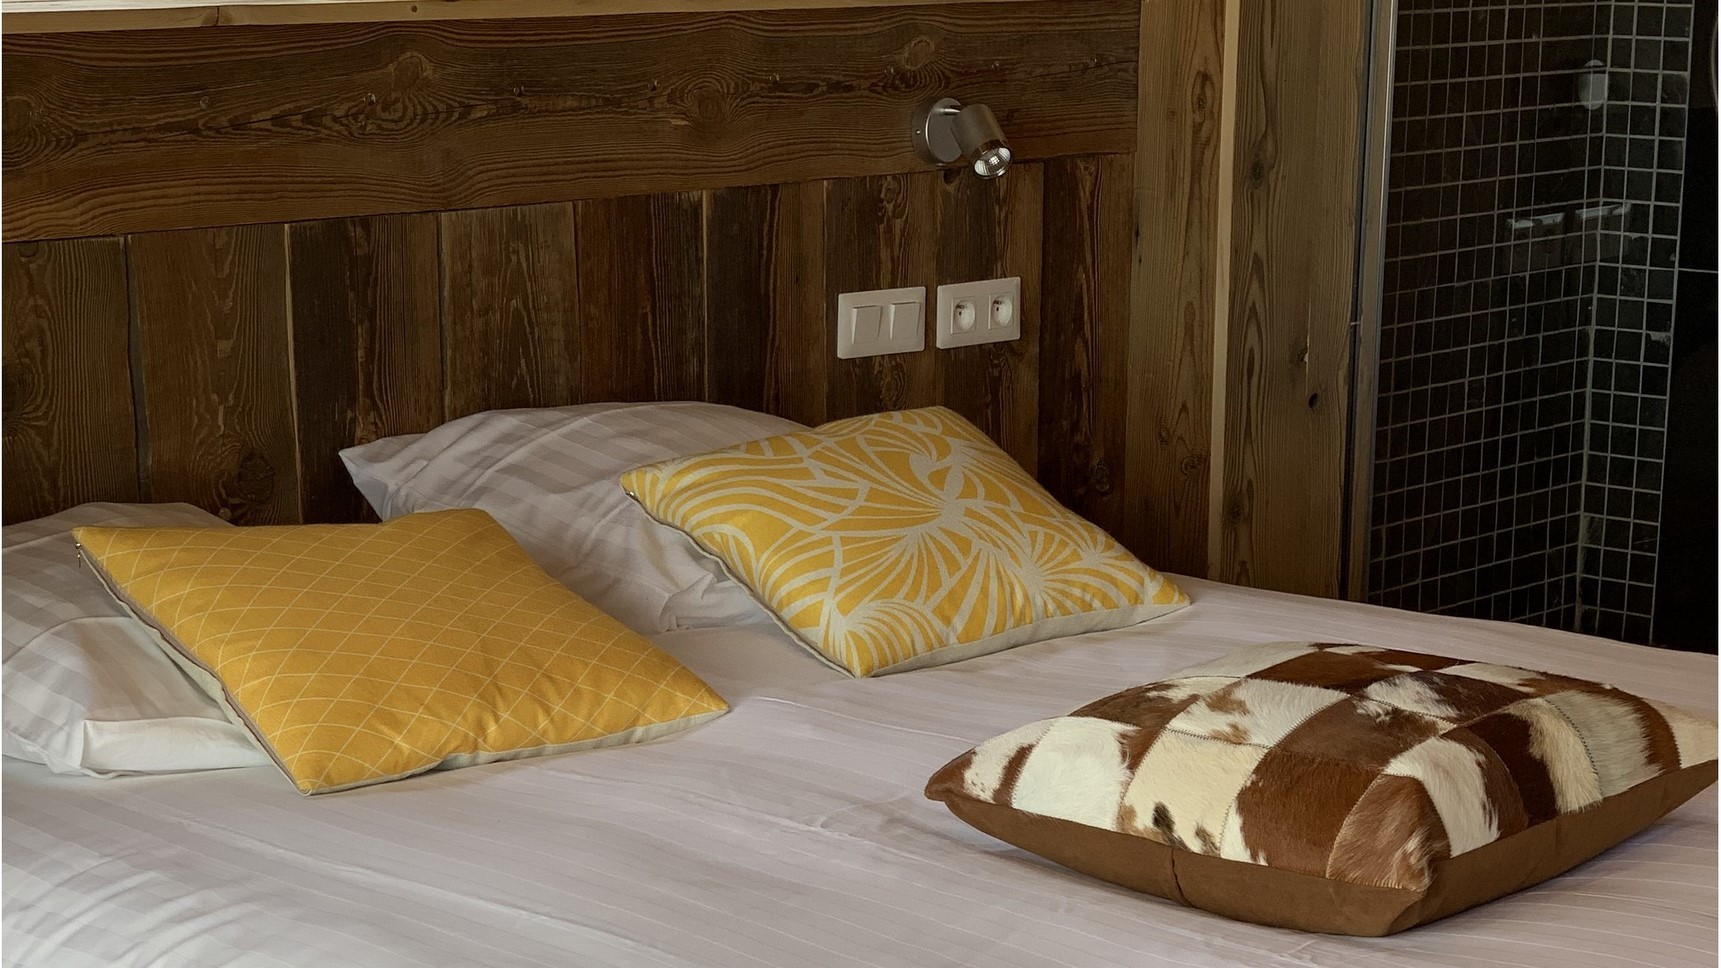 Super Besse chalet, Anorak chalet, waterfall bedroom, king size bed